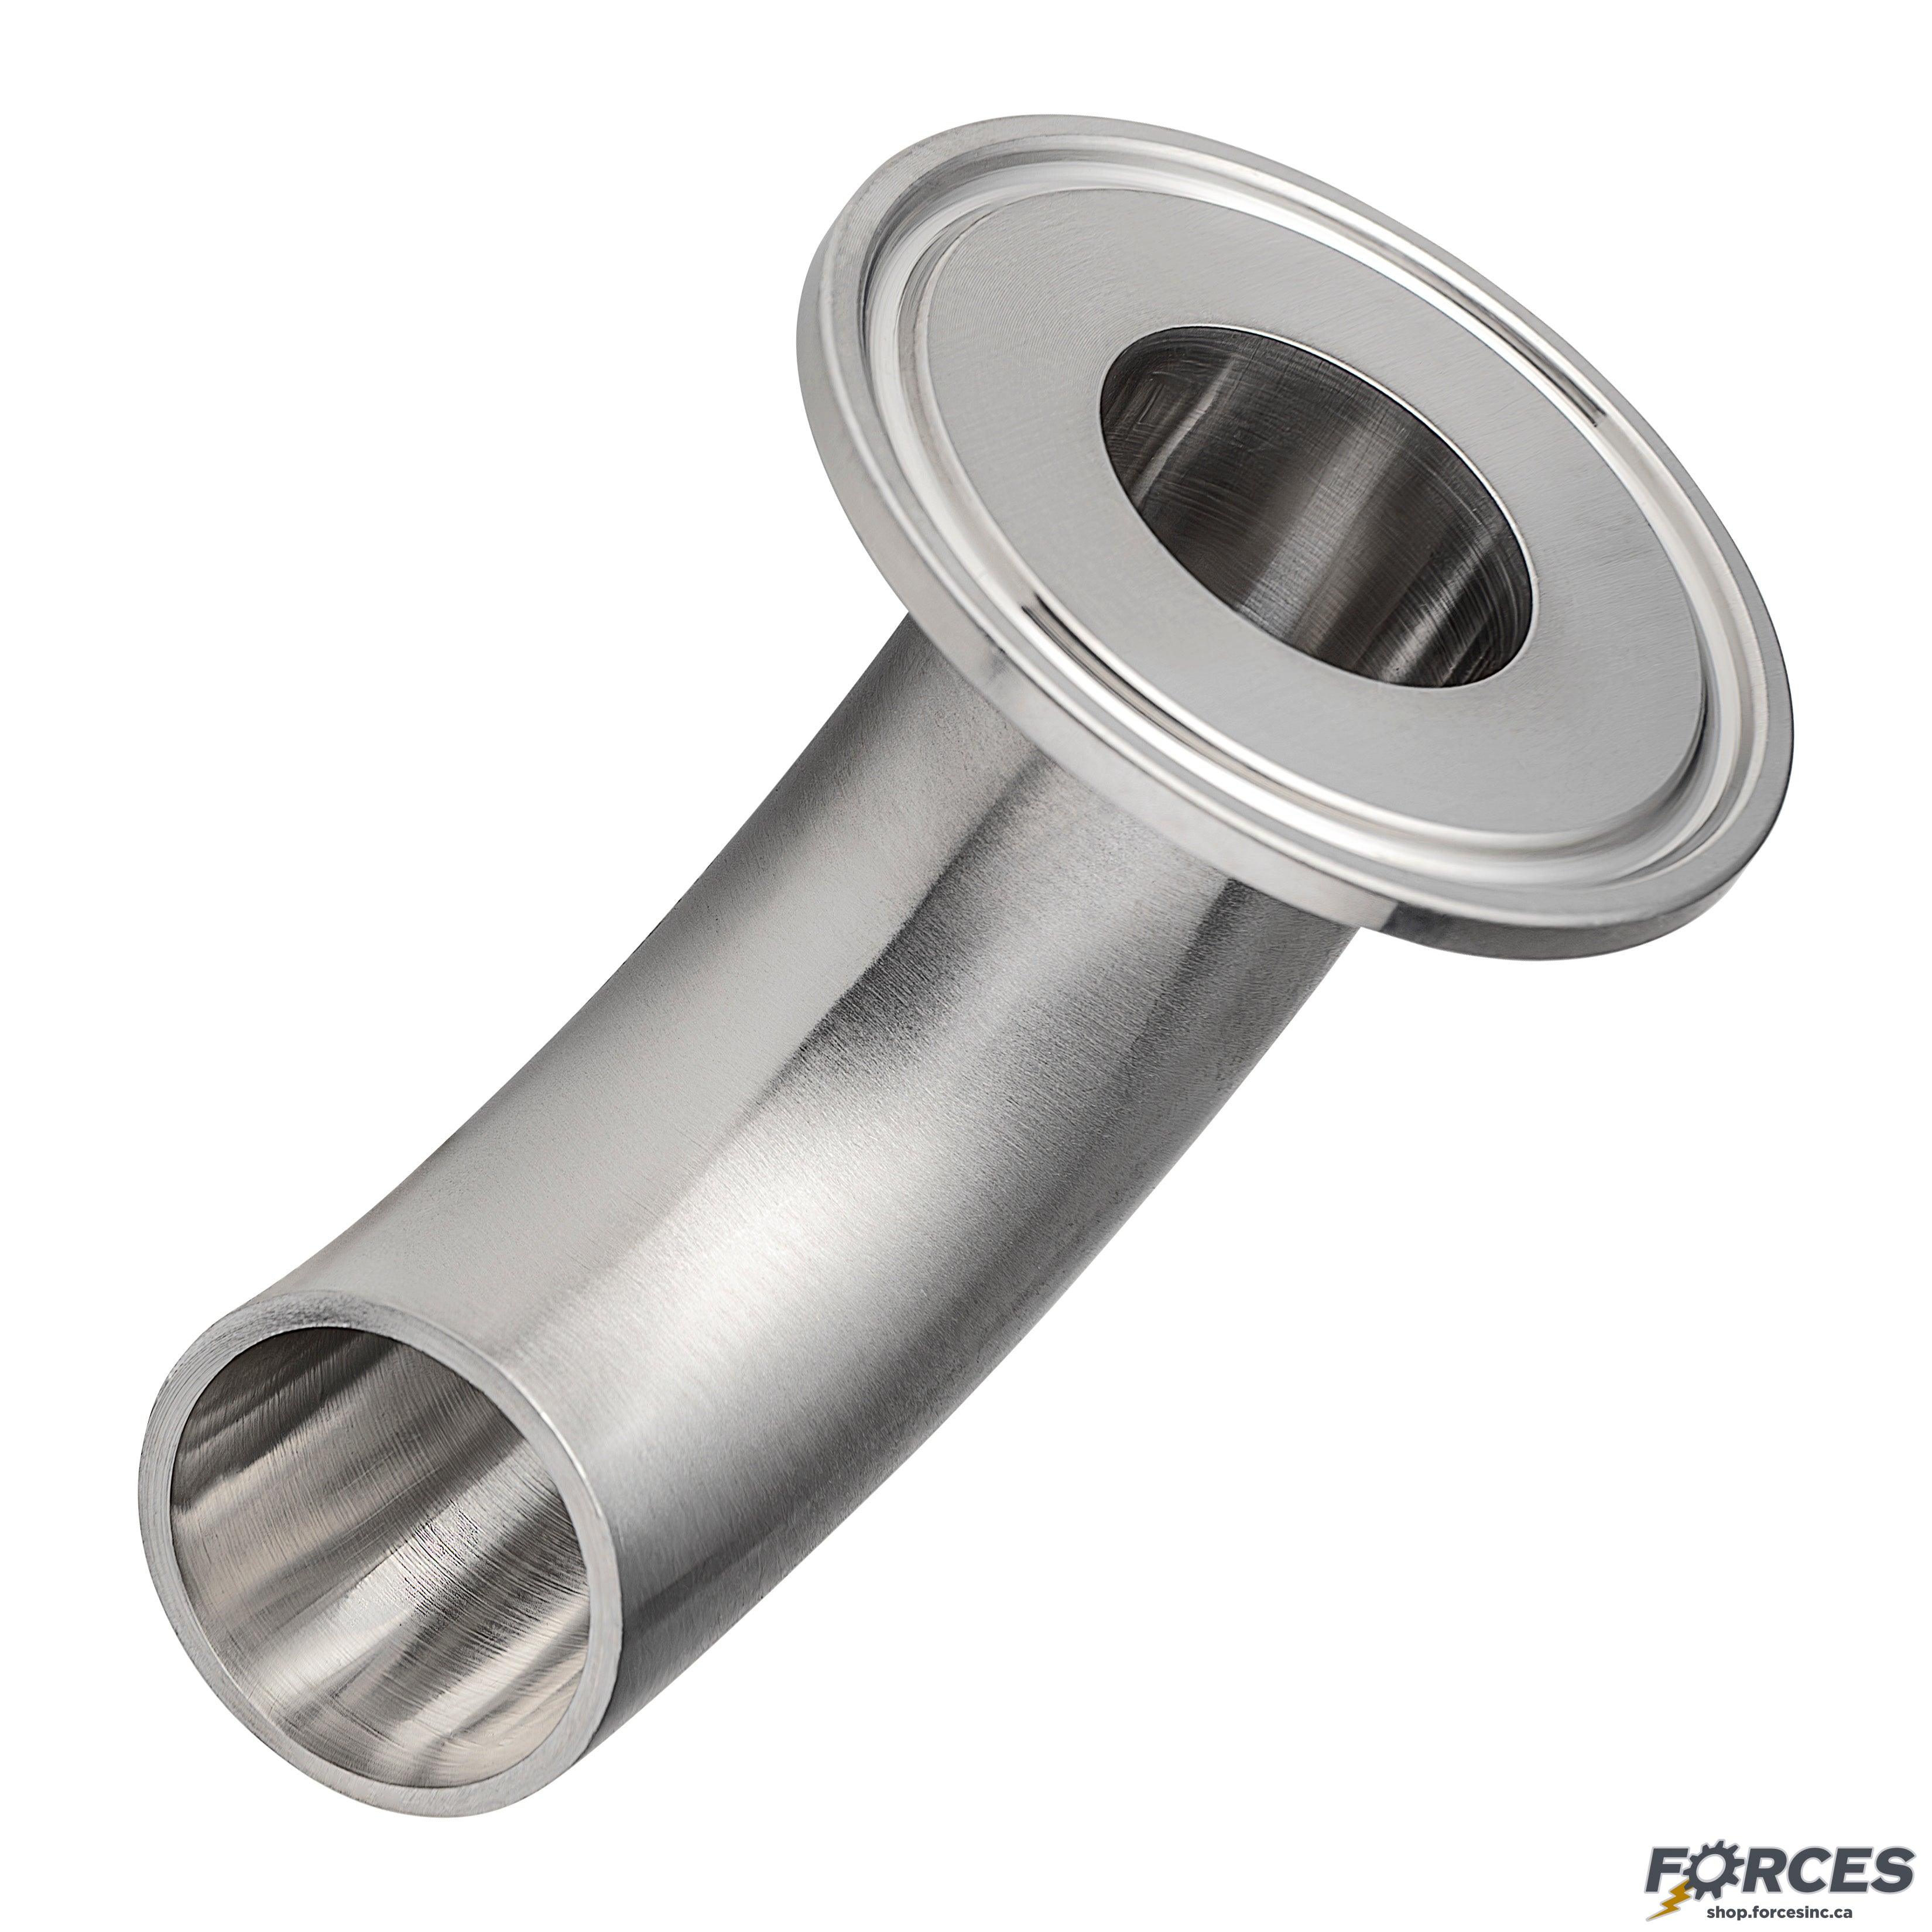 2-1/2" 90° Elbow Tri-Clamp x Buttweld - Stainless Steel 316 - Forces Inc